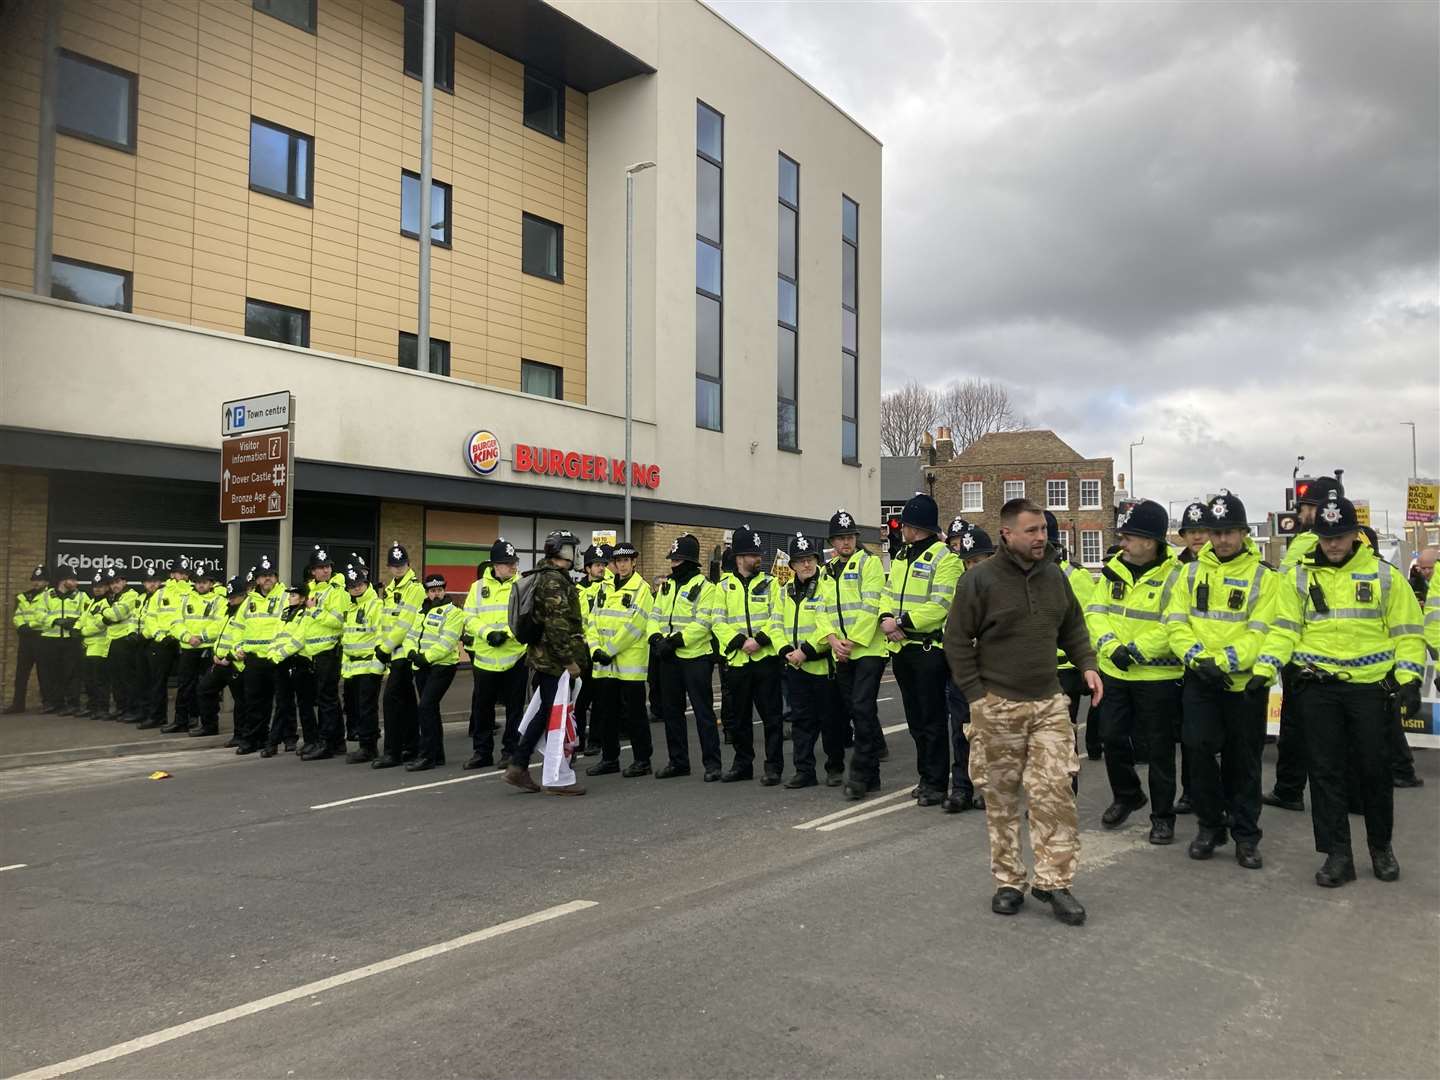 Police form a human chain across the road near the St James' retail park